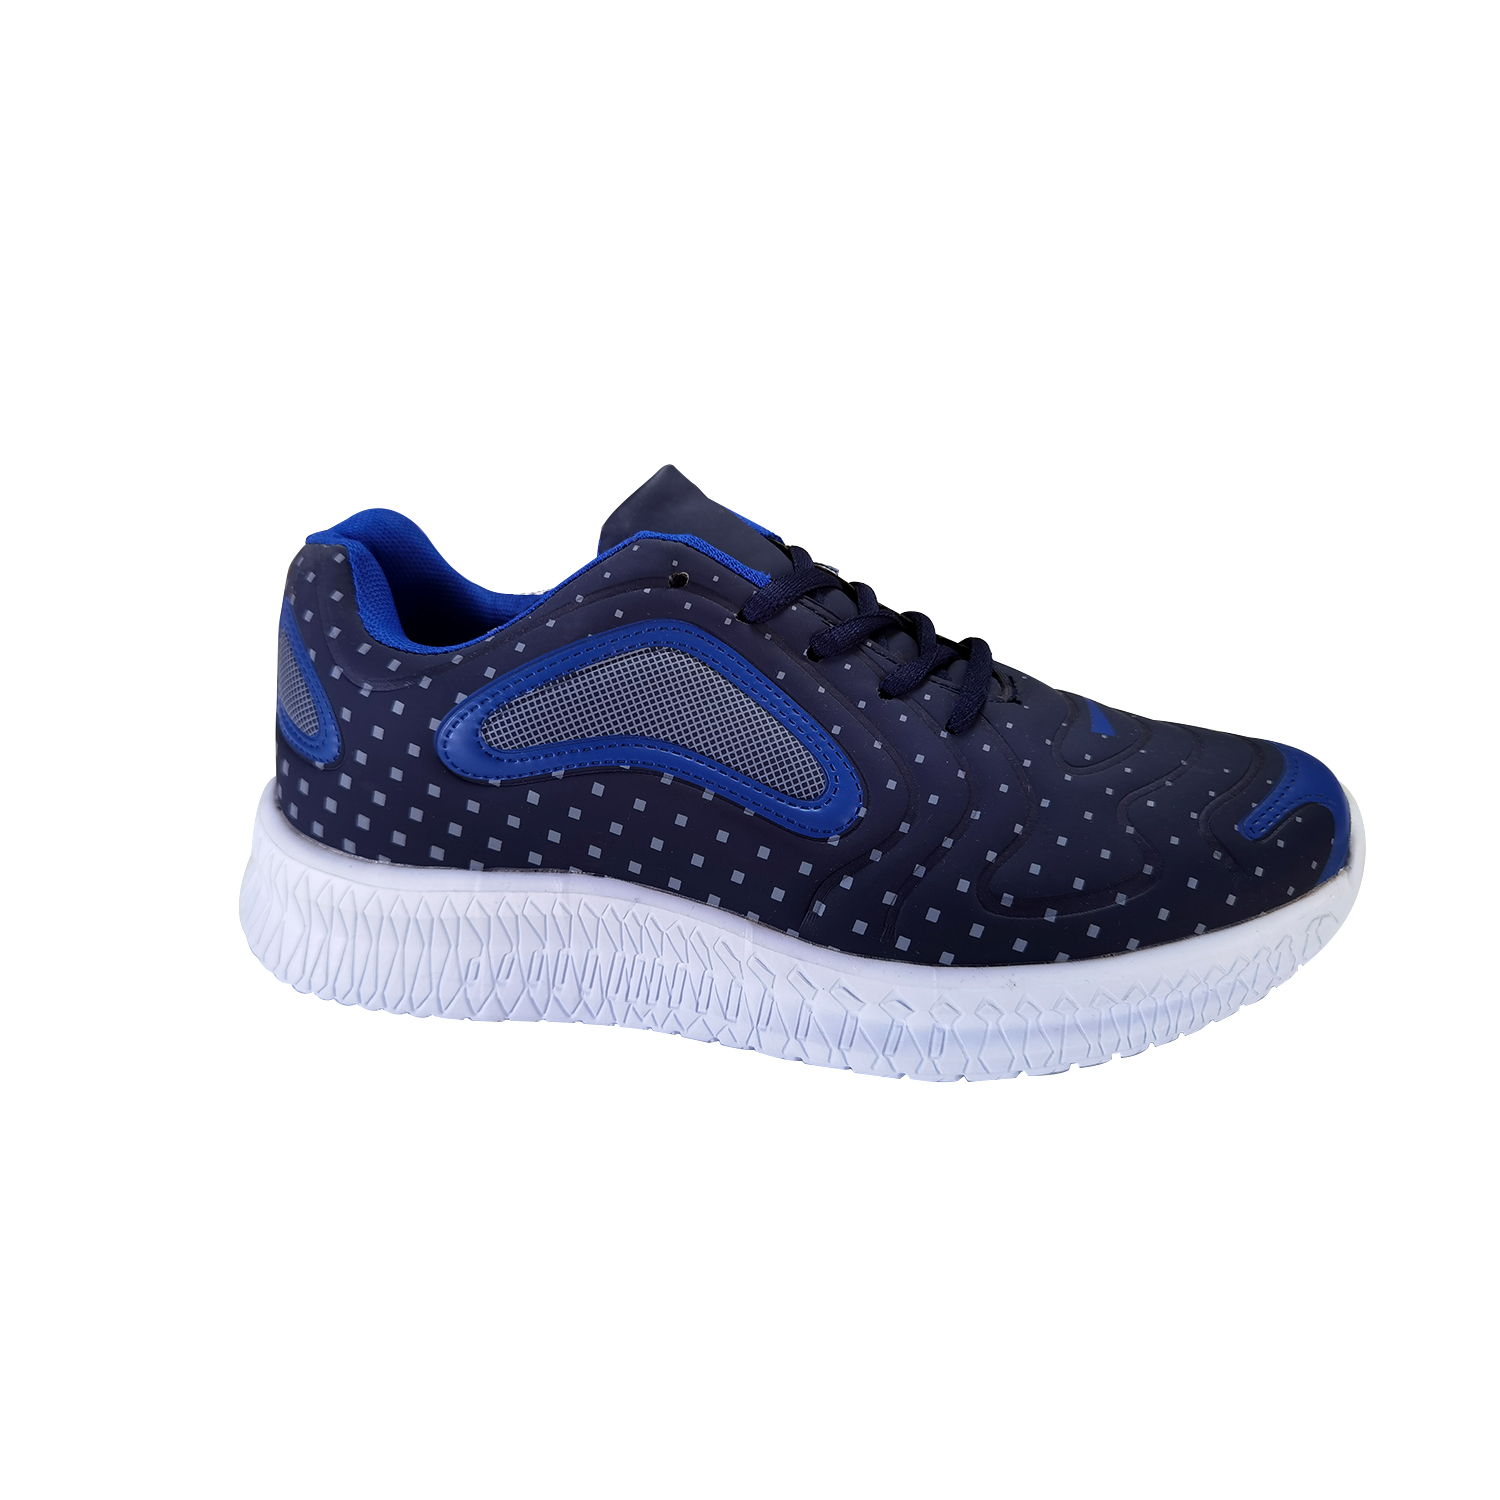 Kids Tennis Shoes Breathable Running Shoes Walking Shoes Fashion Sneakers for Boys and Girls 